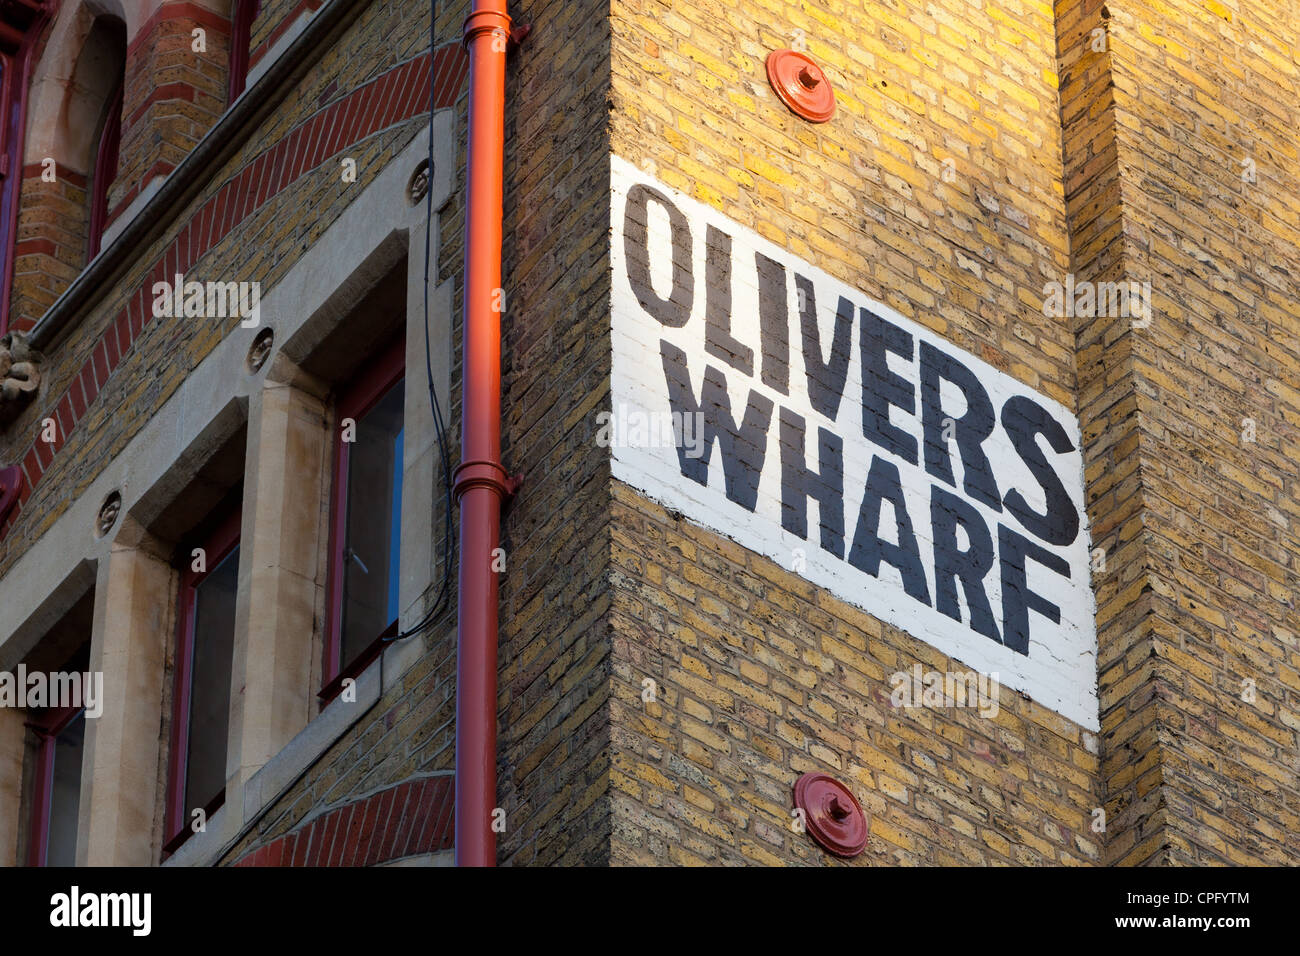 Olivers wharf, Wapping, London Stock Photo - Alamy